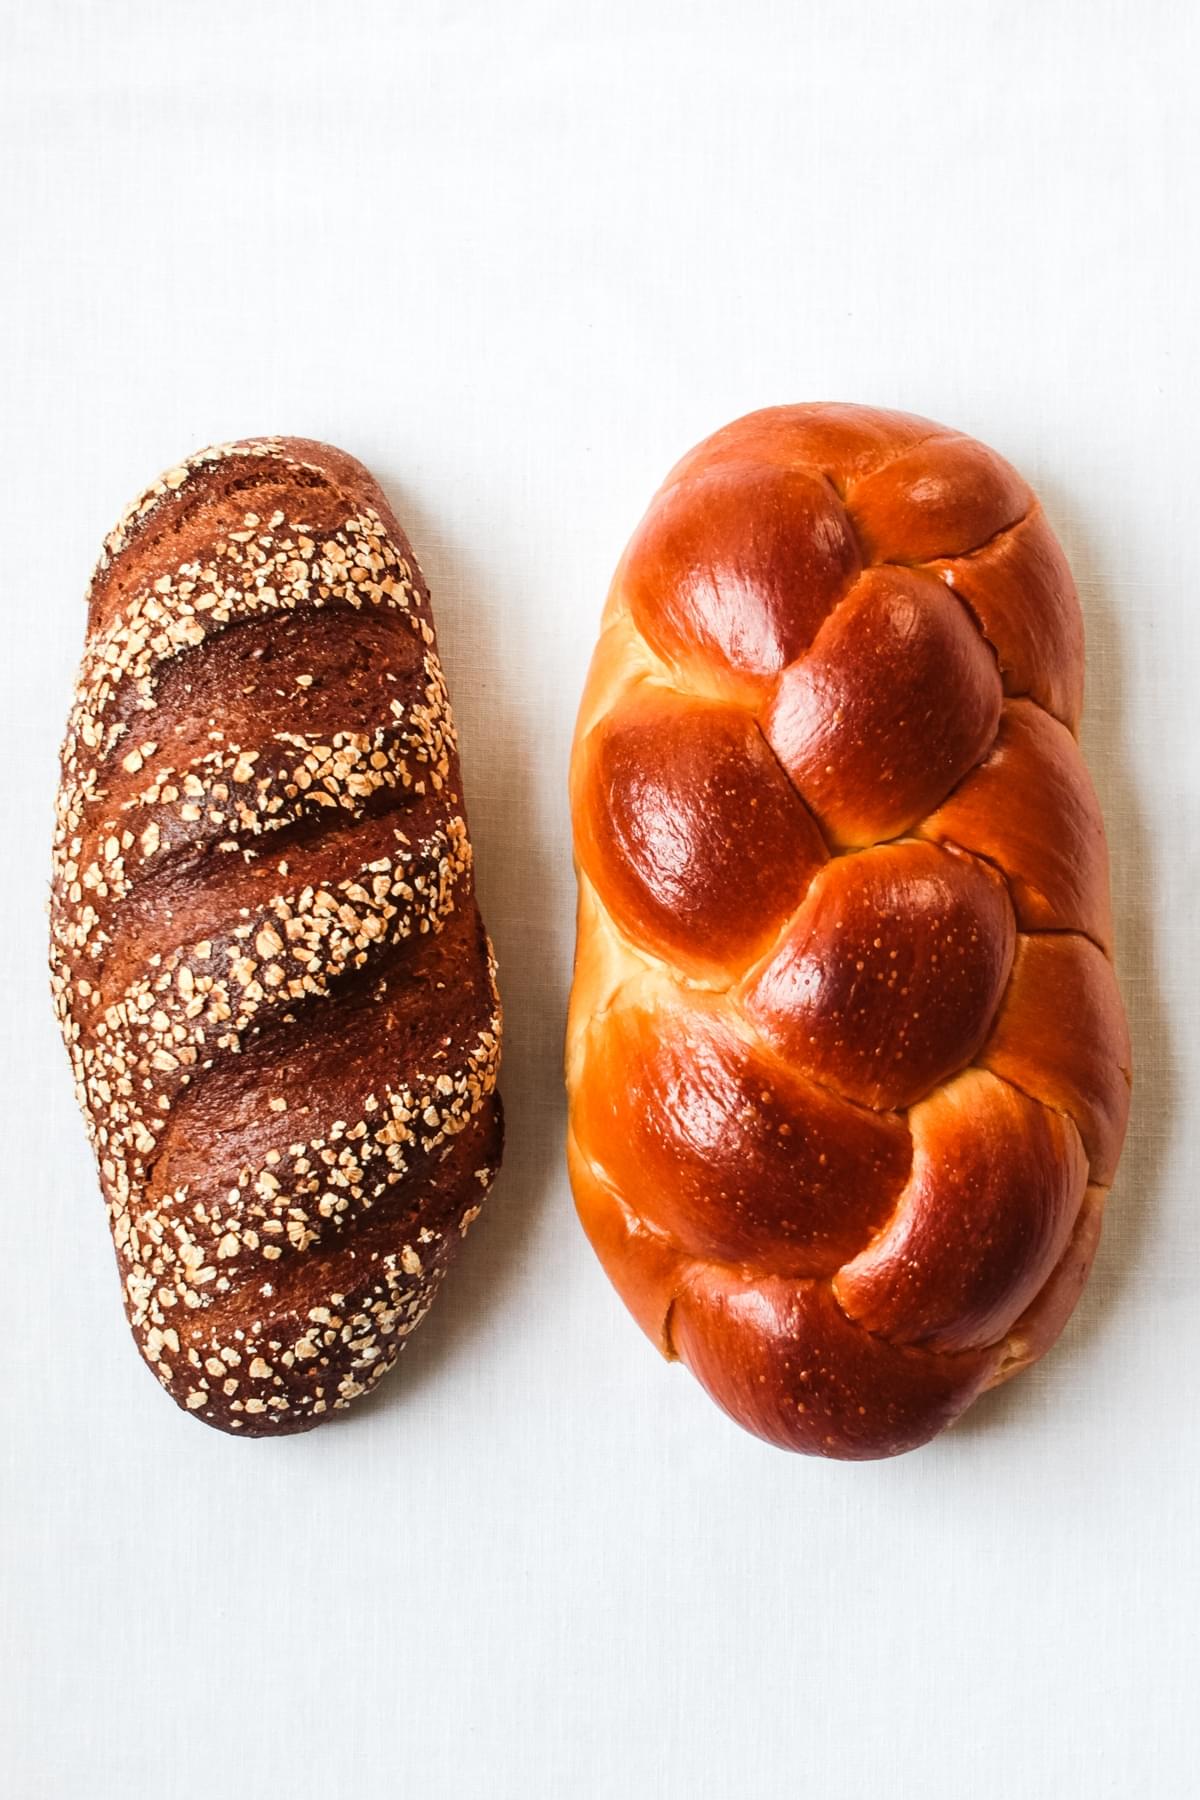 loaf of seeded whole wheat bread next to a loaf of challah bread